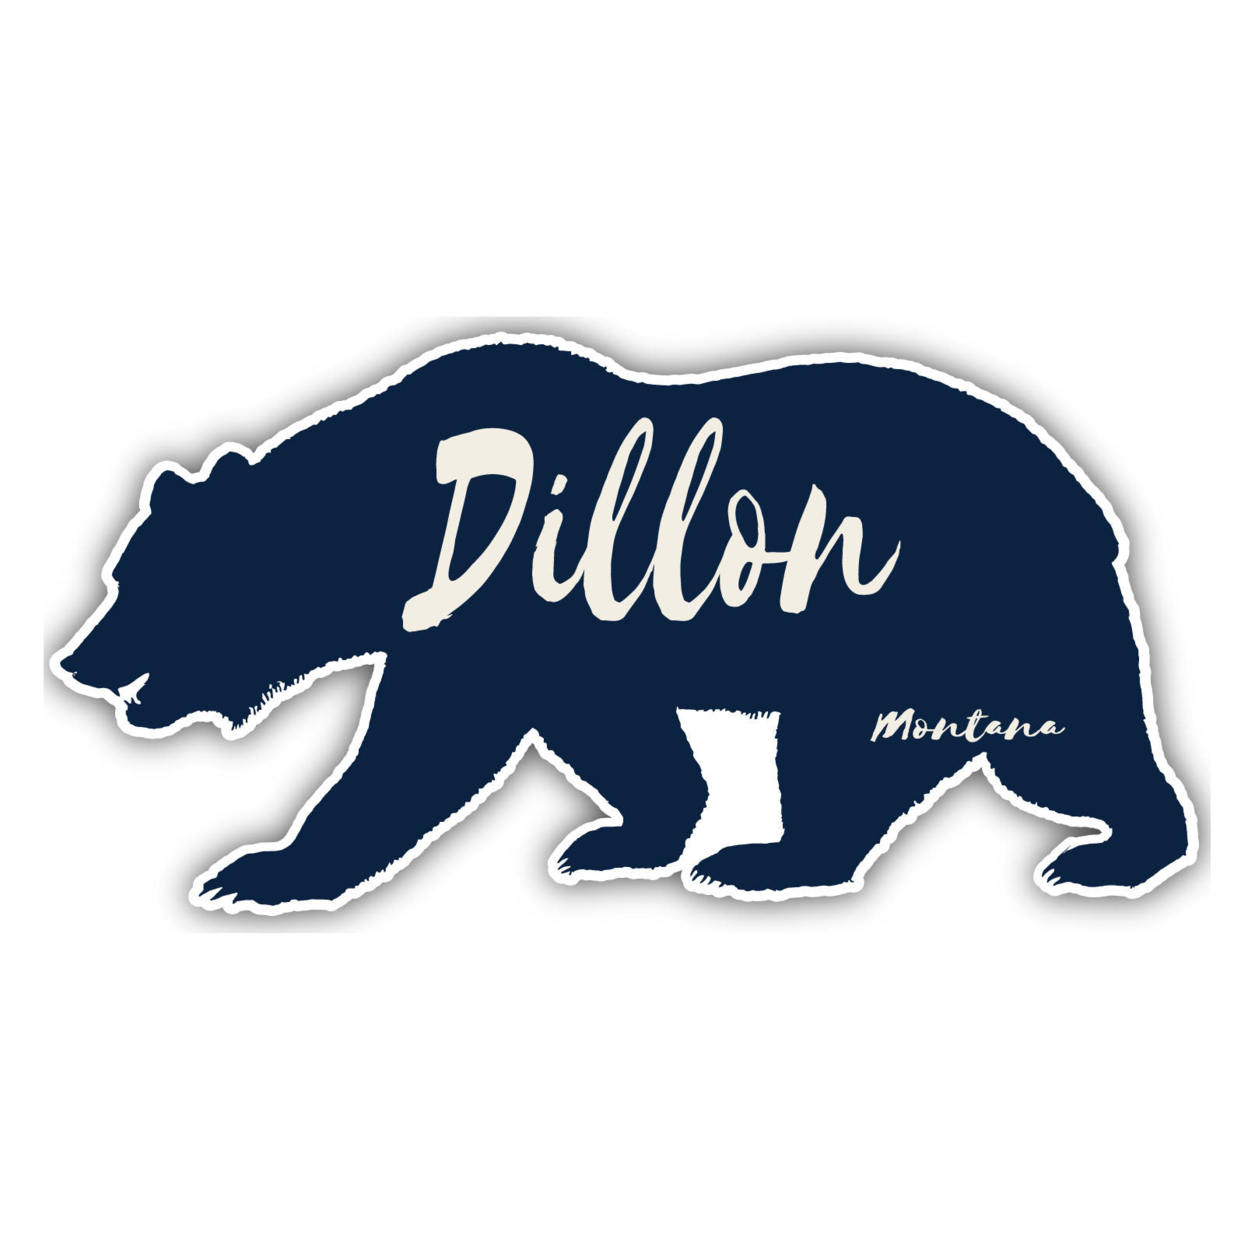 Dillon Montana Souvenir Decorative Stickers (Choose Theme And Size) - 4-Pack, 8-Inch, Camp Life